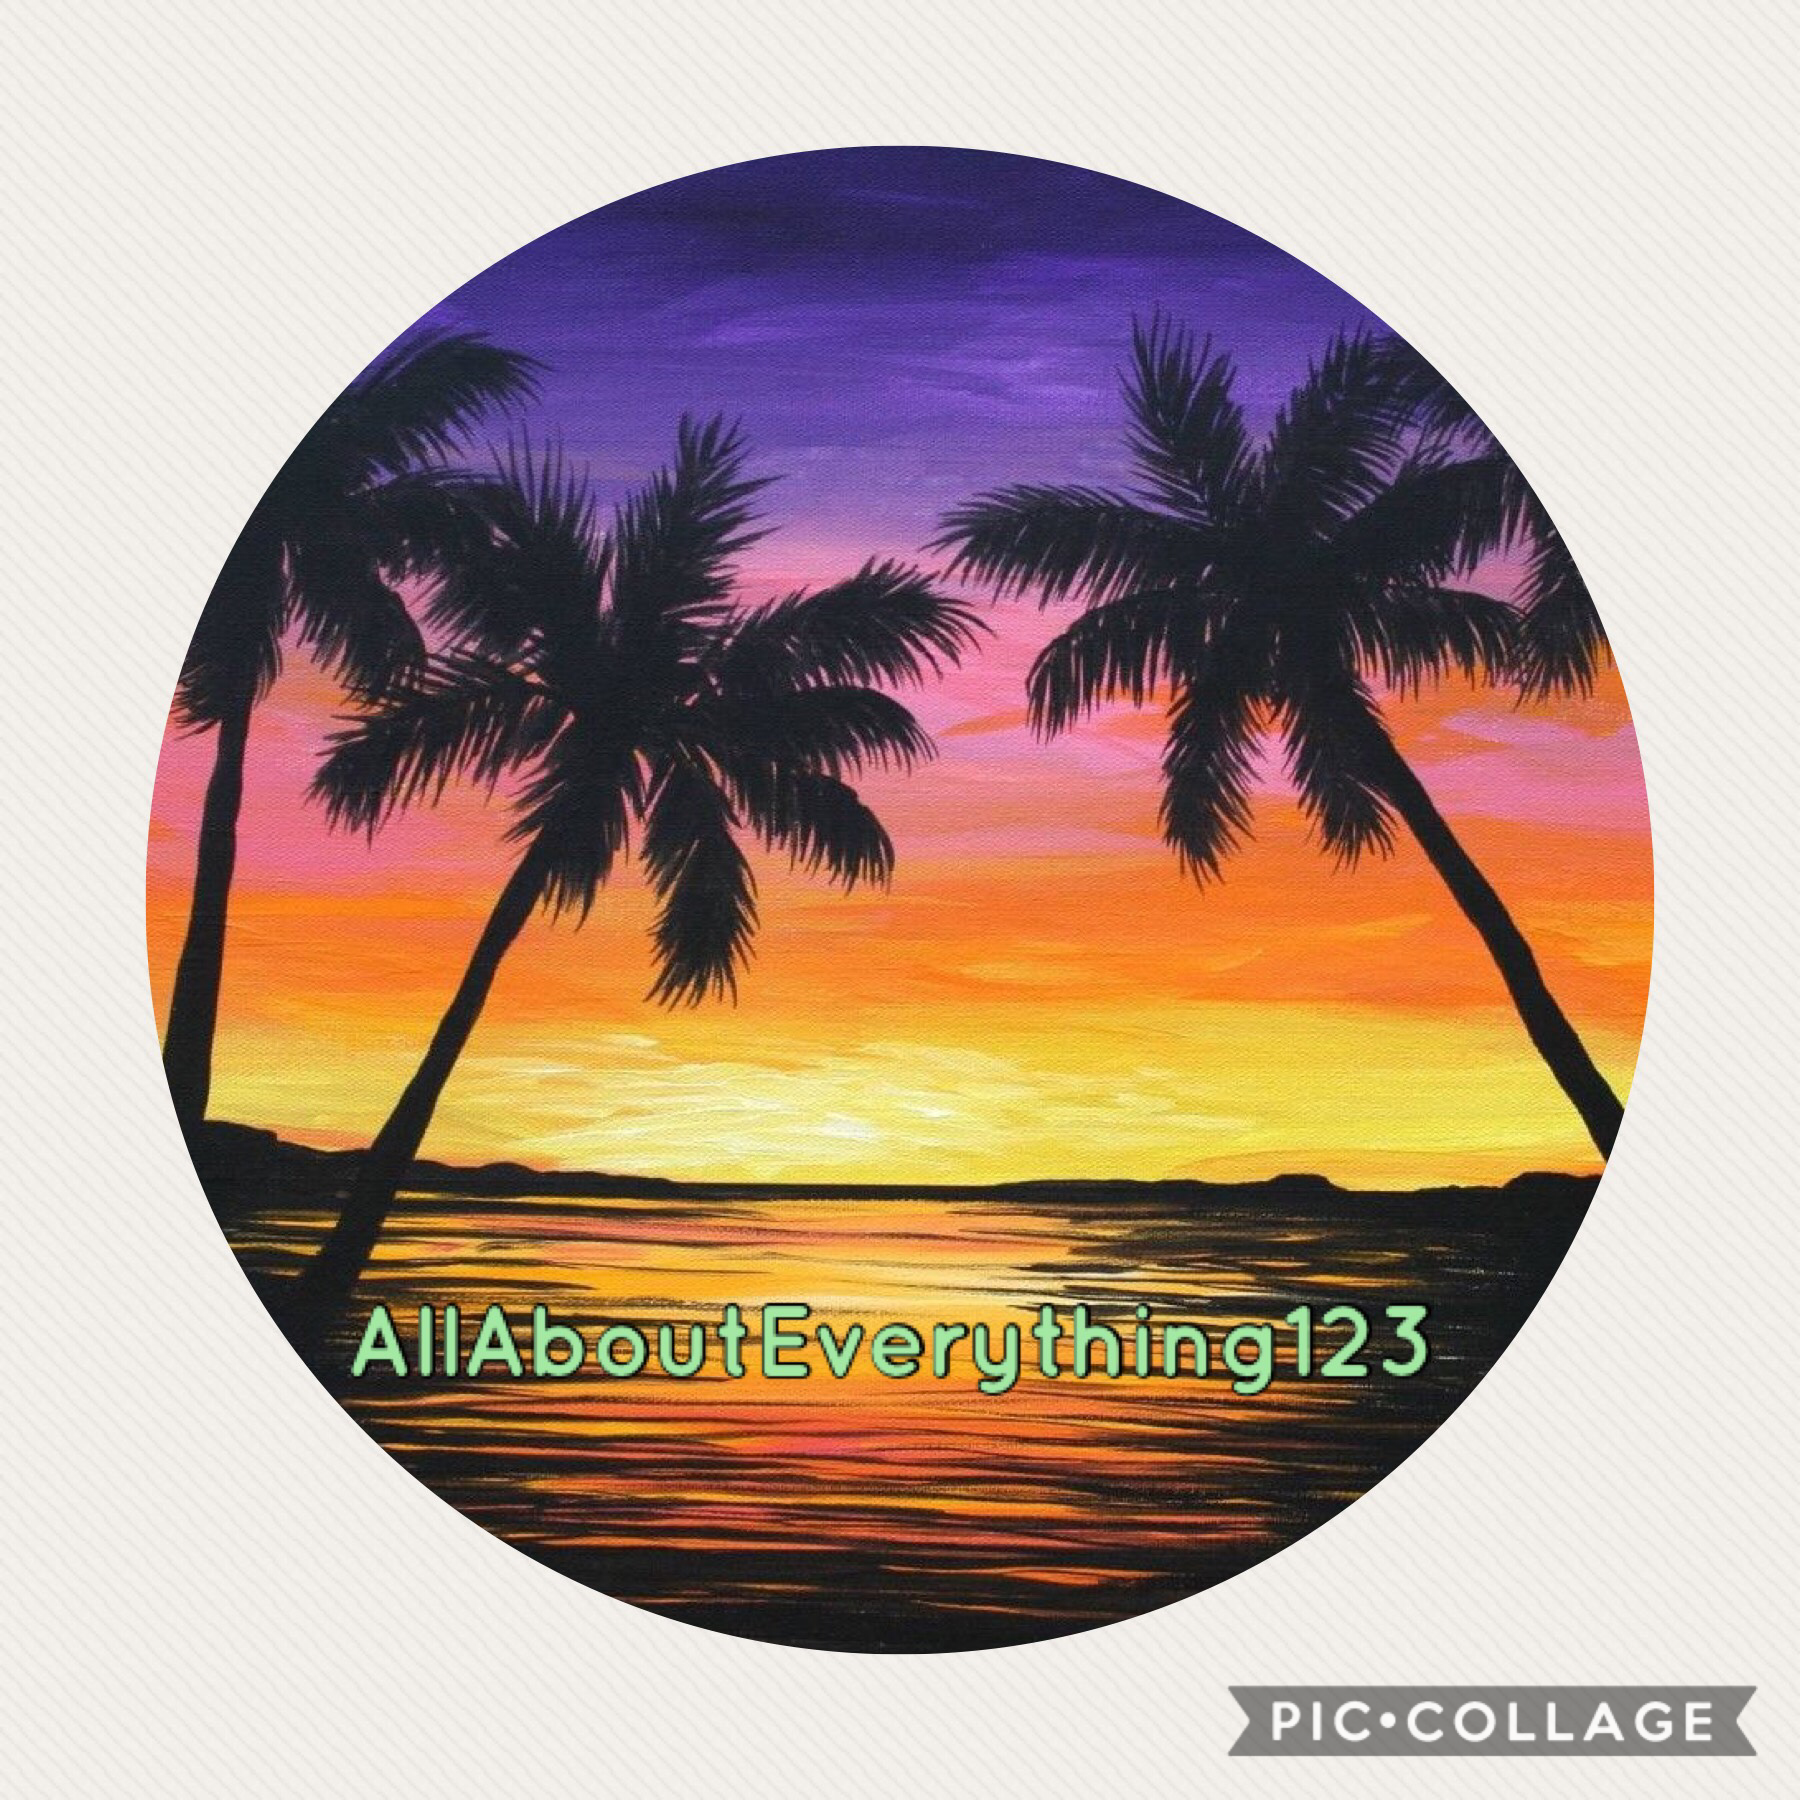 Competition entry for AllAboutEverything123 please make sure you go follow them. And like and comment on all my posts. STAY POSITIVE x